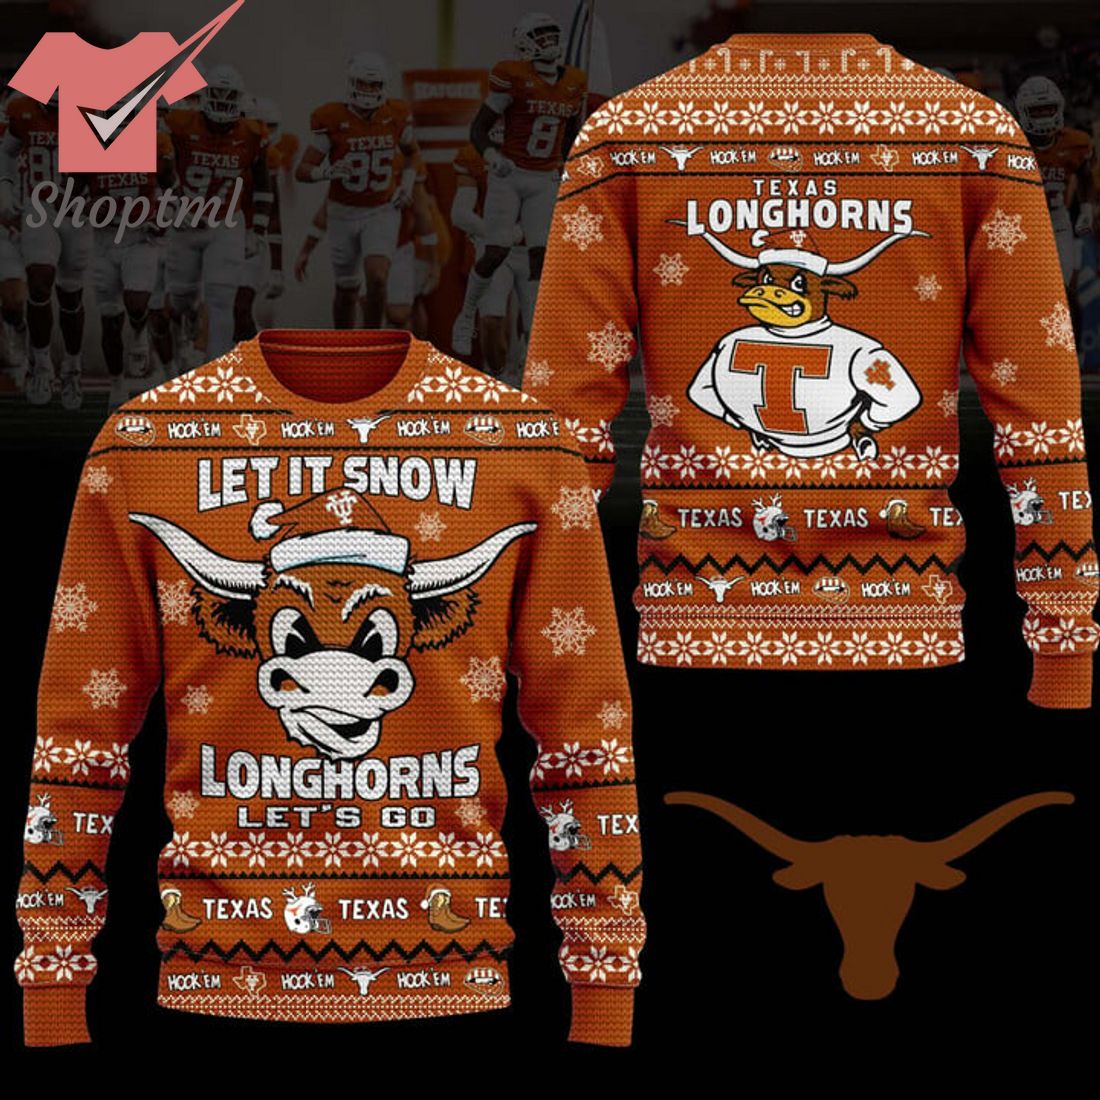 Texas Longhorn Let It Snow Let's Go Ugly Christmas Sweater